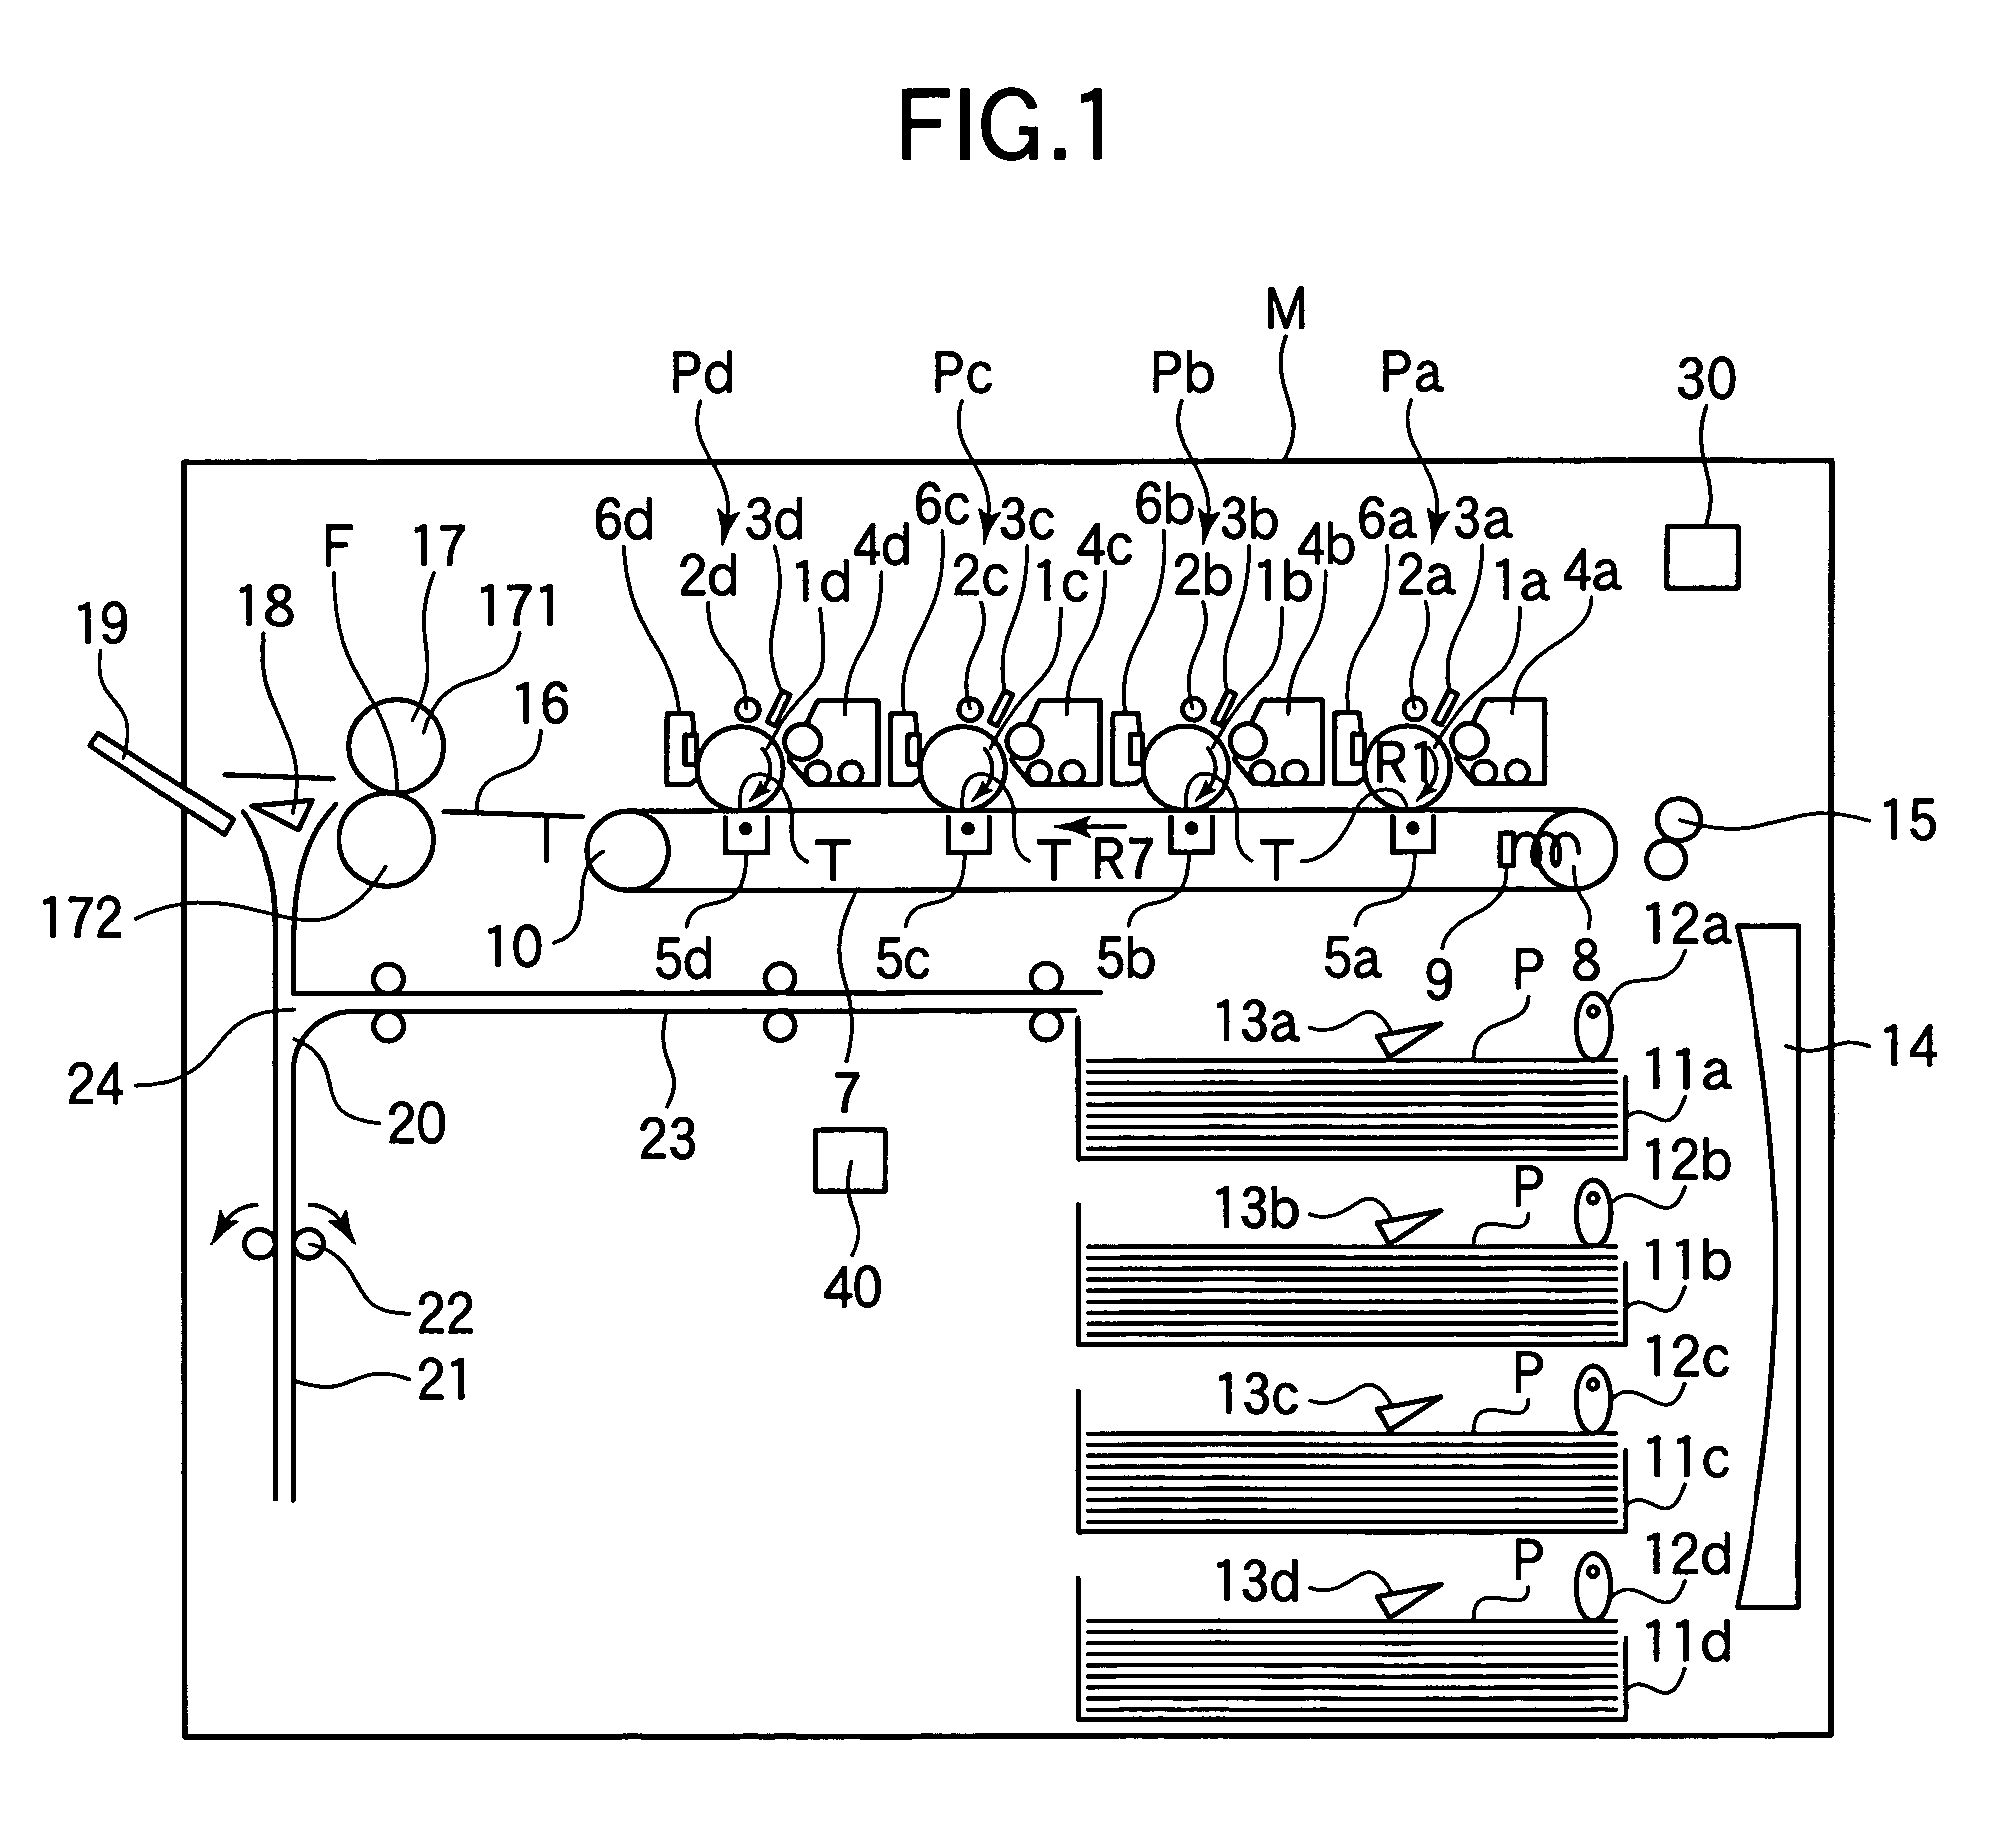 Image forming apparatus with a toner image forming device